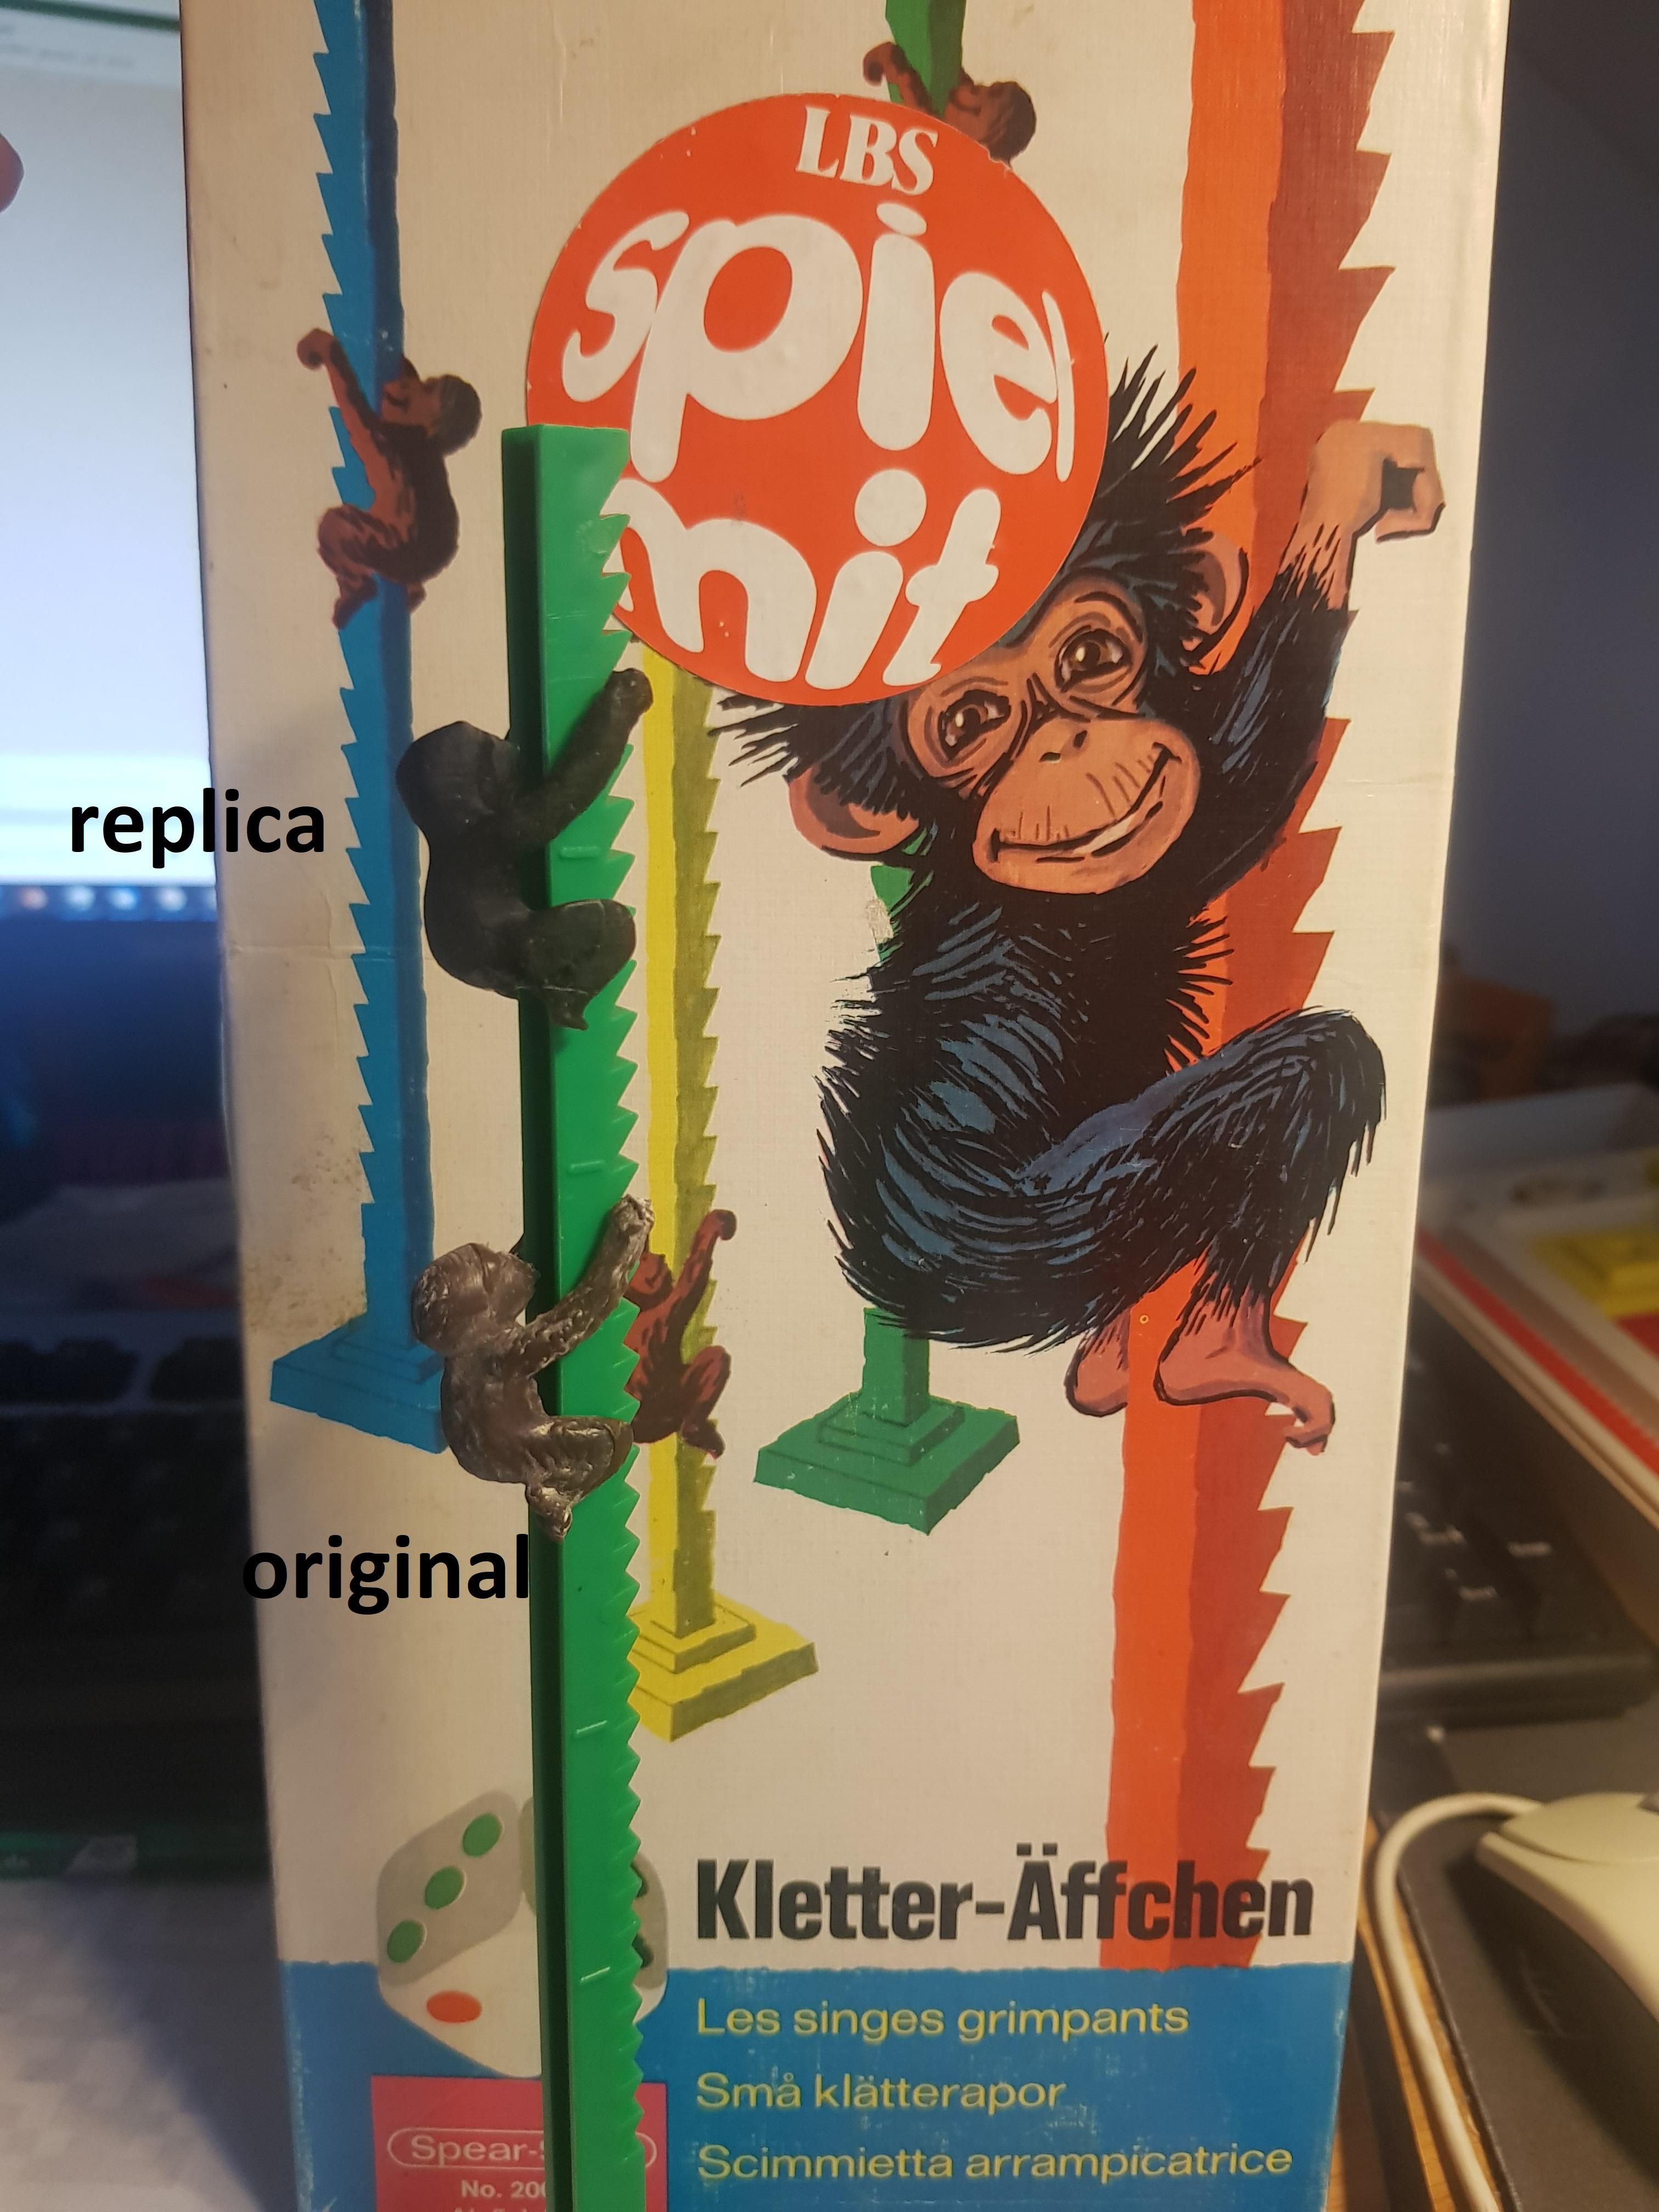 Kletter aeffchen: monkey climbing game replacement 3d model